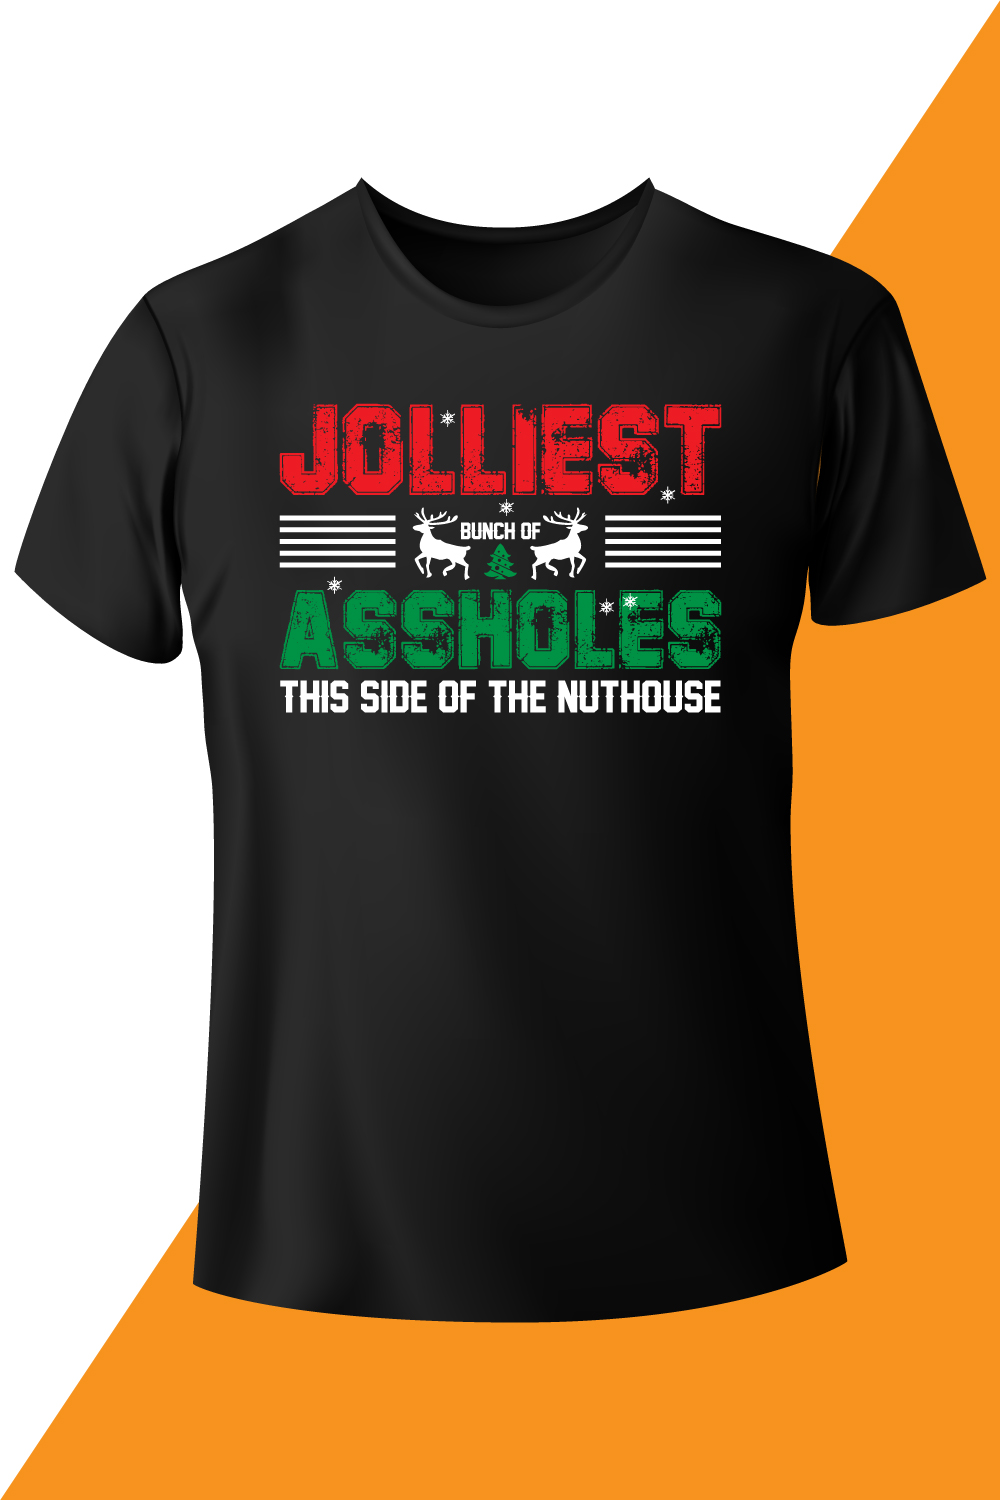 Image of a black T-shirt with a charming slogan jolliest bunch of assholes this side of the Nuthouse.